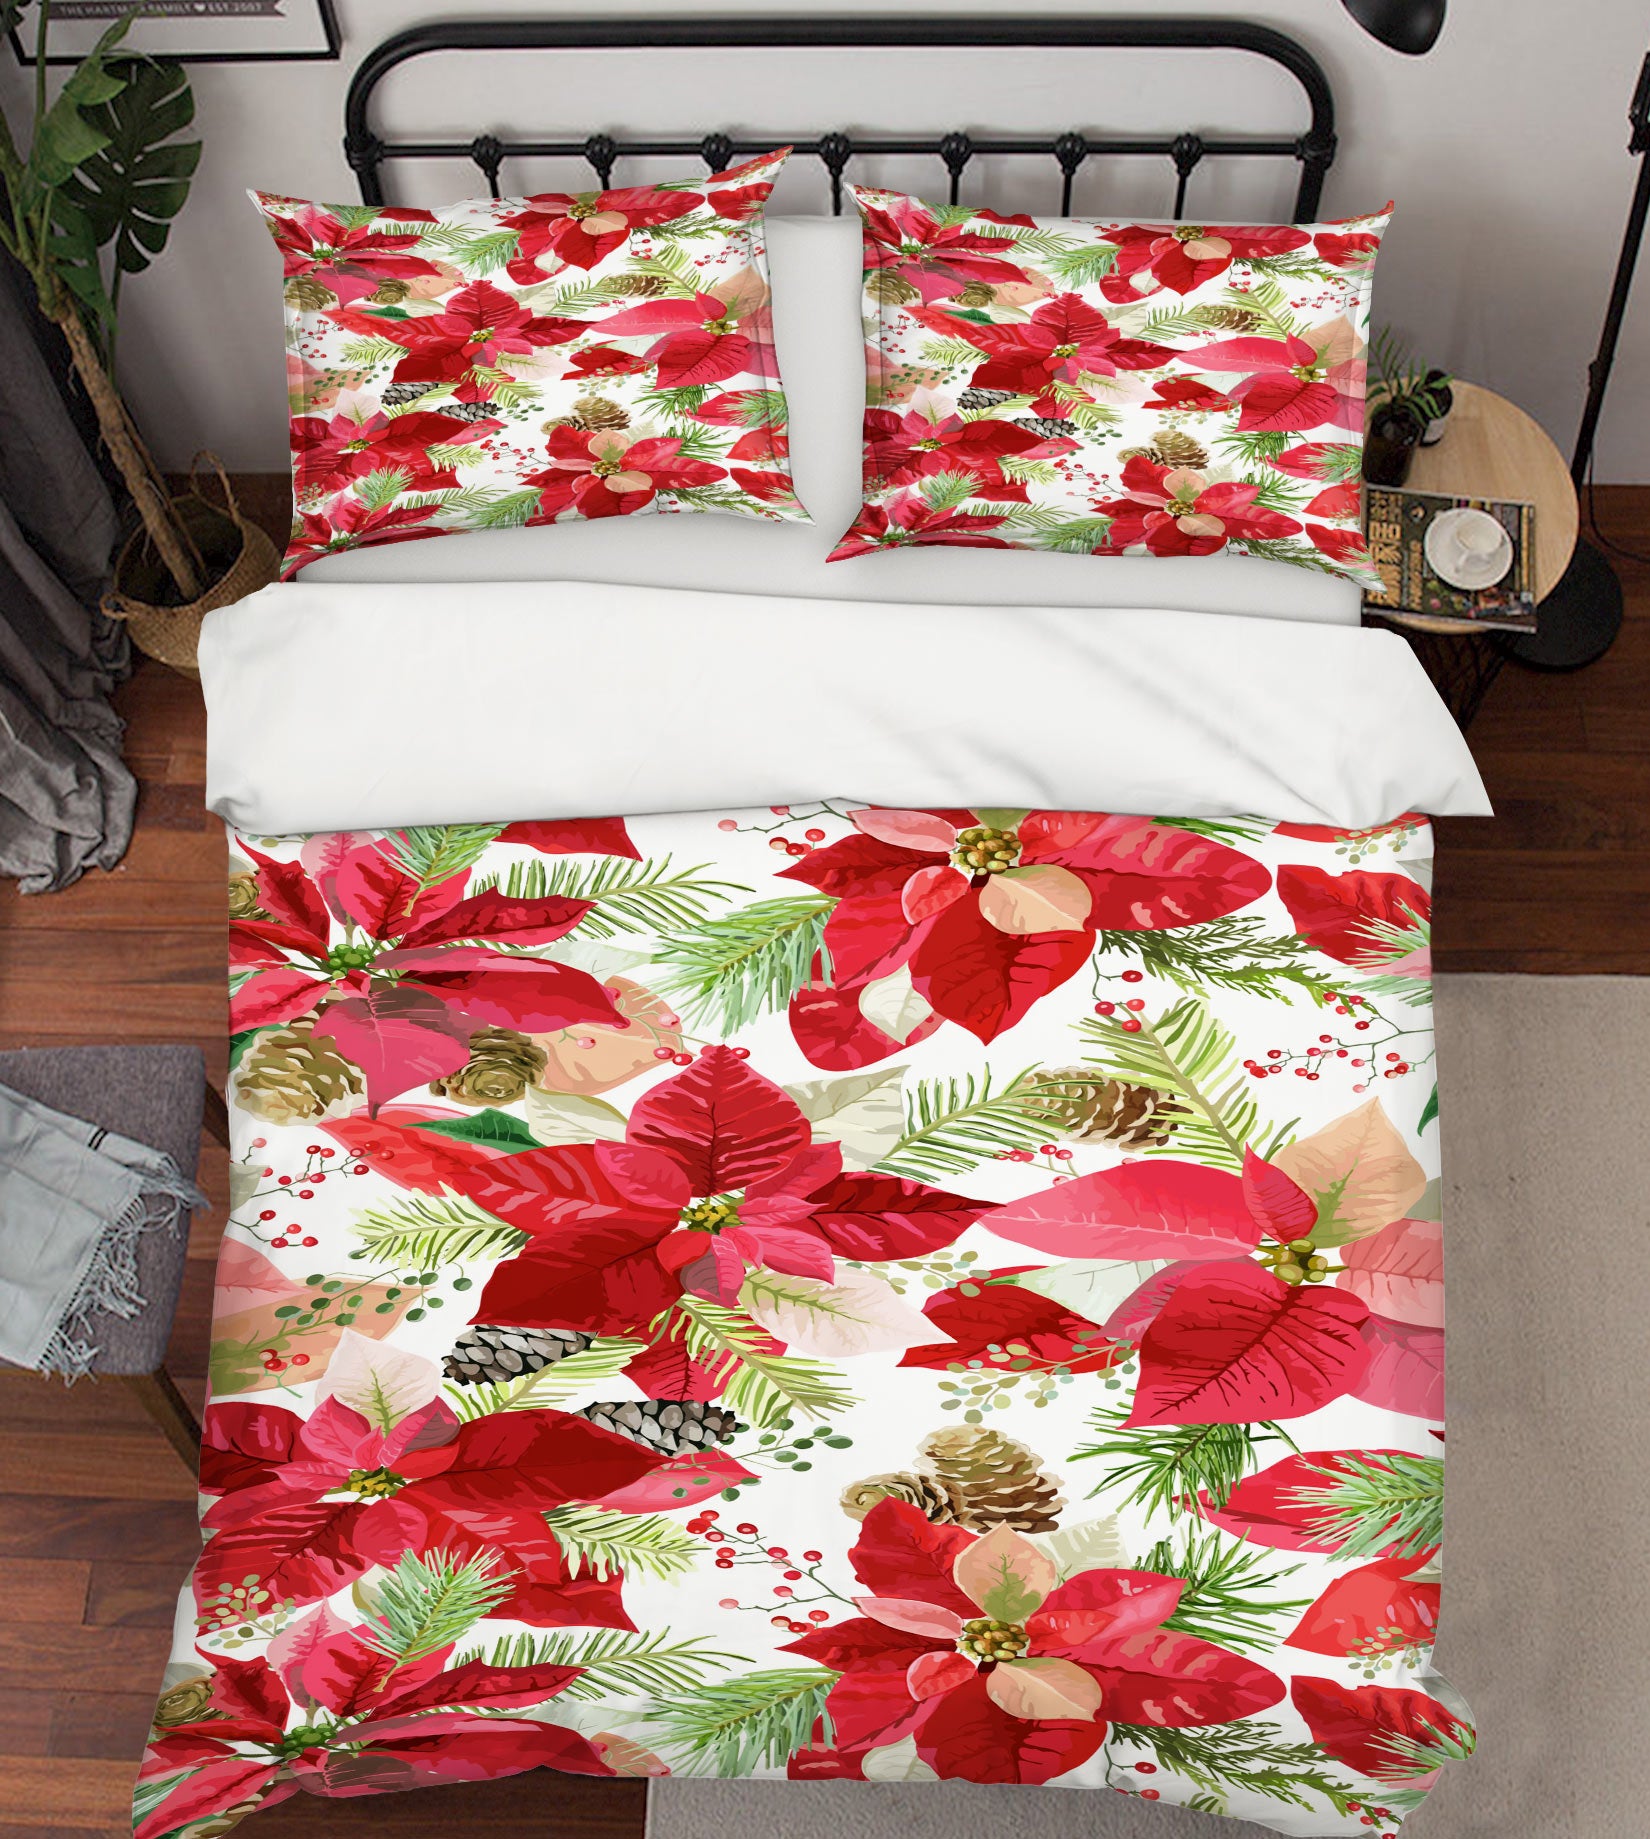 3D Red Leaves Flowers 52145 Christmas Quilt Duvet Cover Xmas Bed Pillowcases